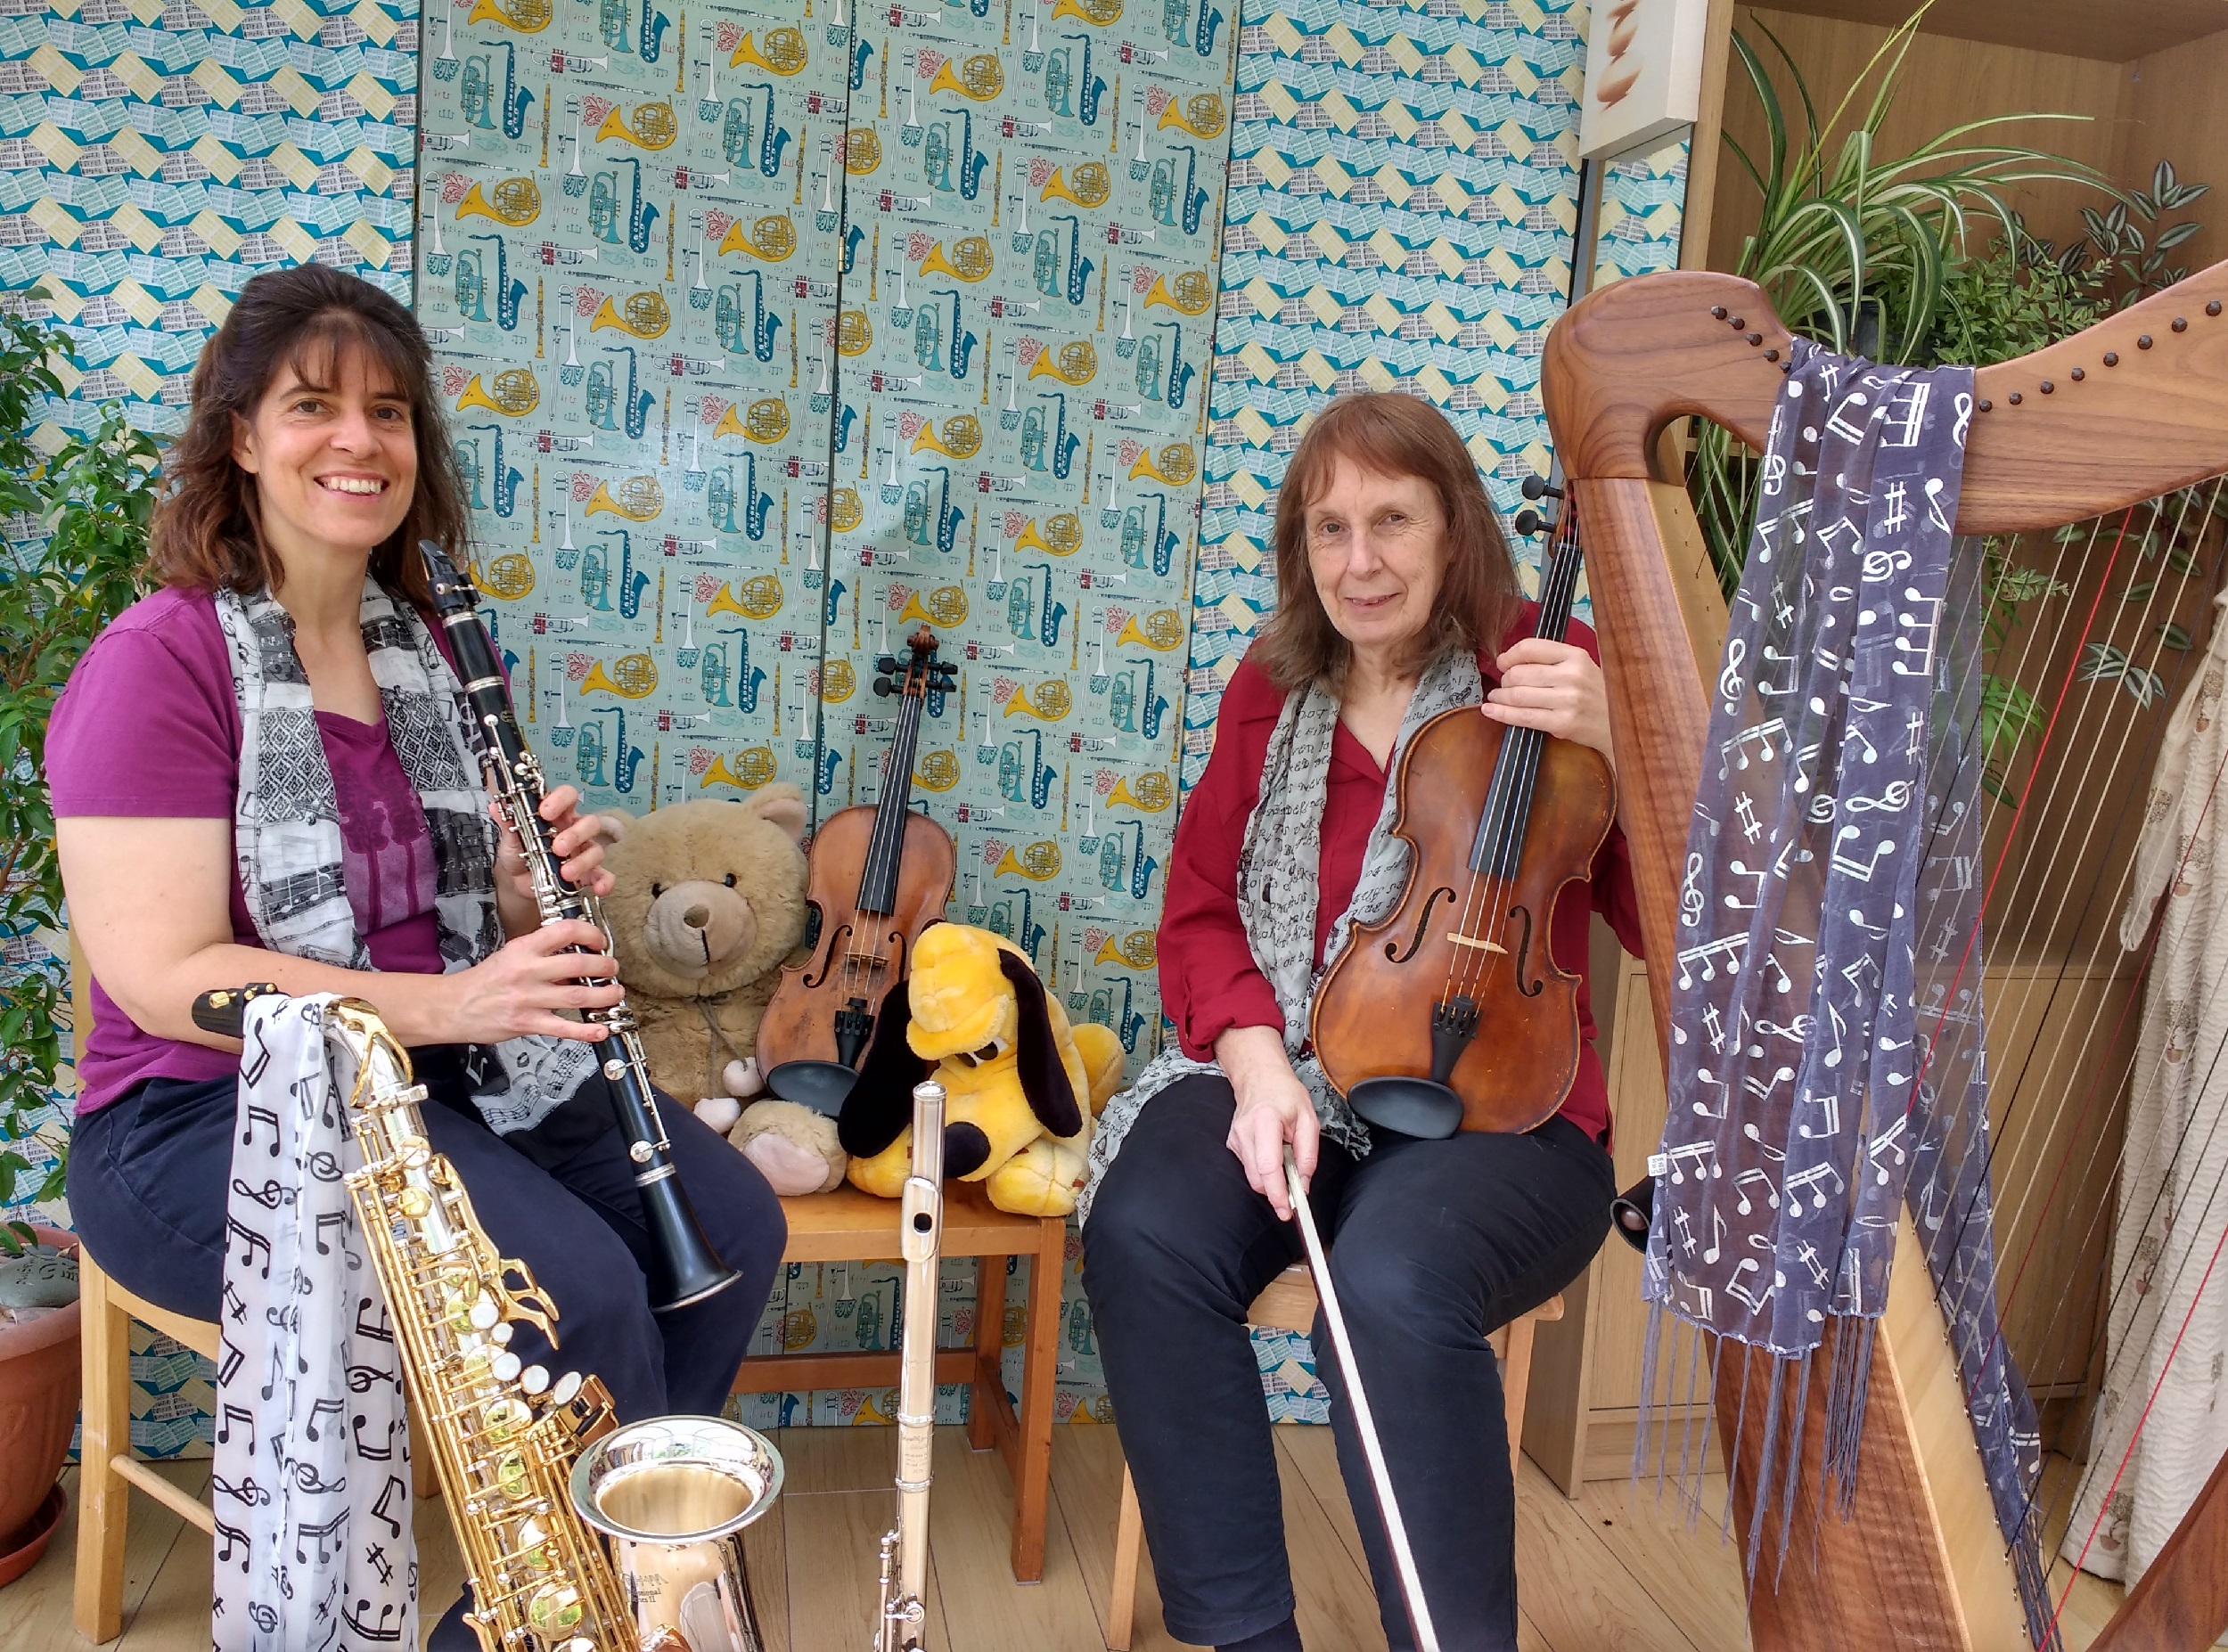 The two members of Chestra sit surrounded by instruments and light scarves. They have some teddies in the background.